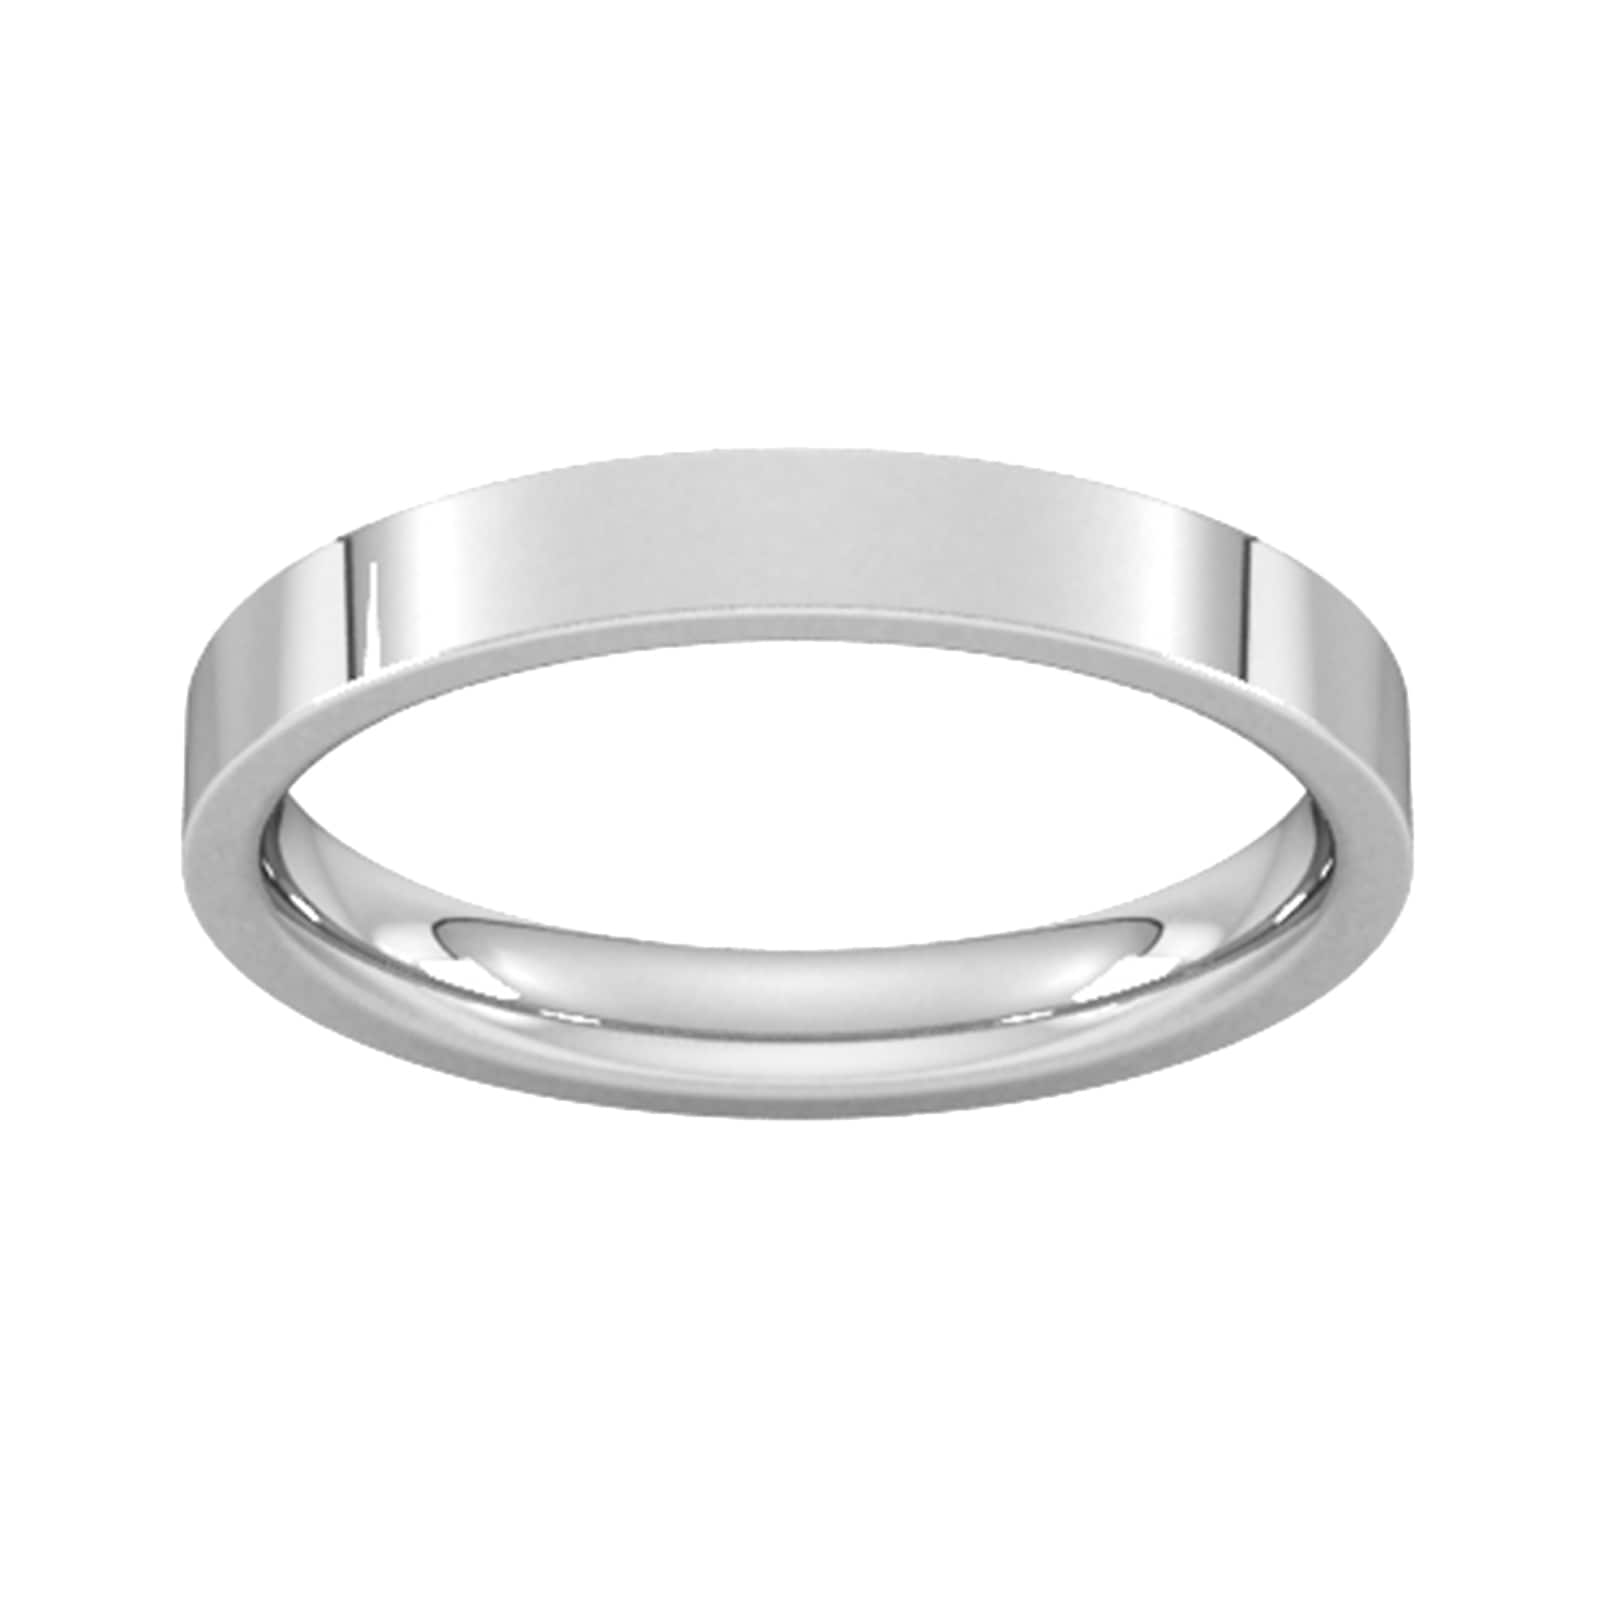 3mm Flat Court Heavy Wedding Ring In 9 Carat White Gold - Ring Size L